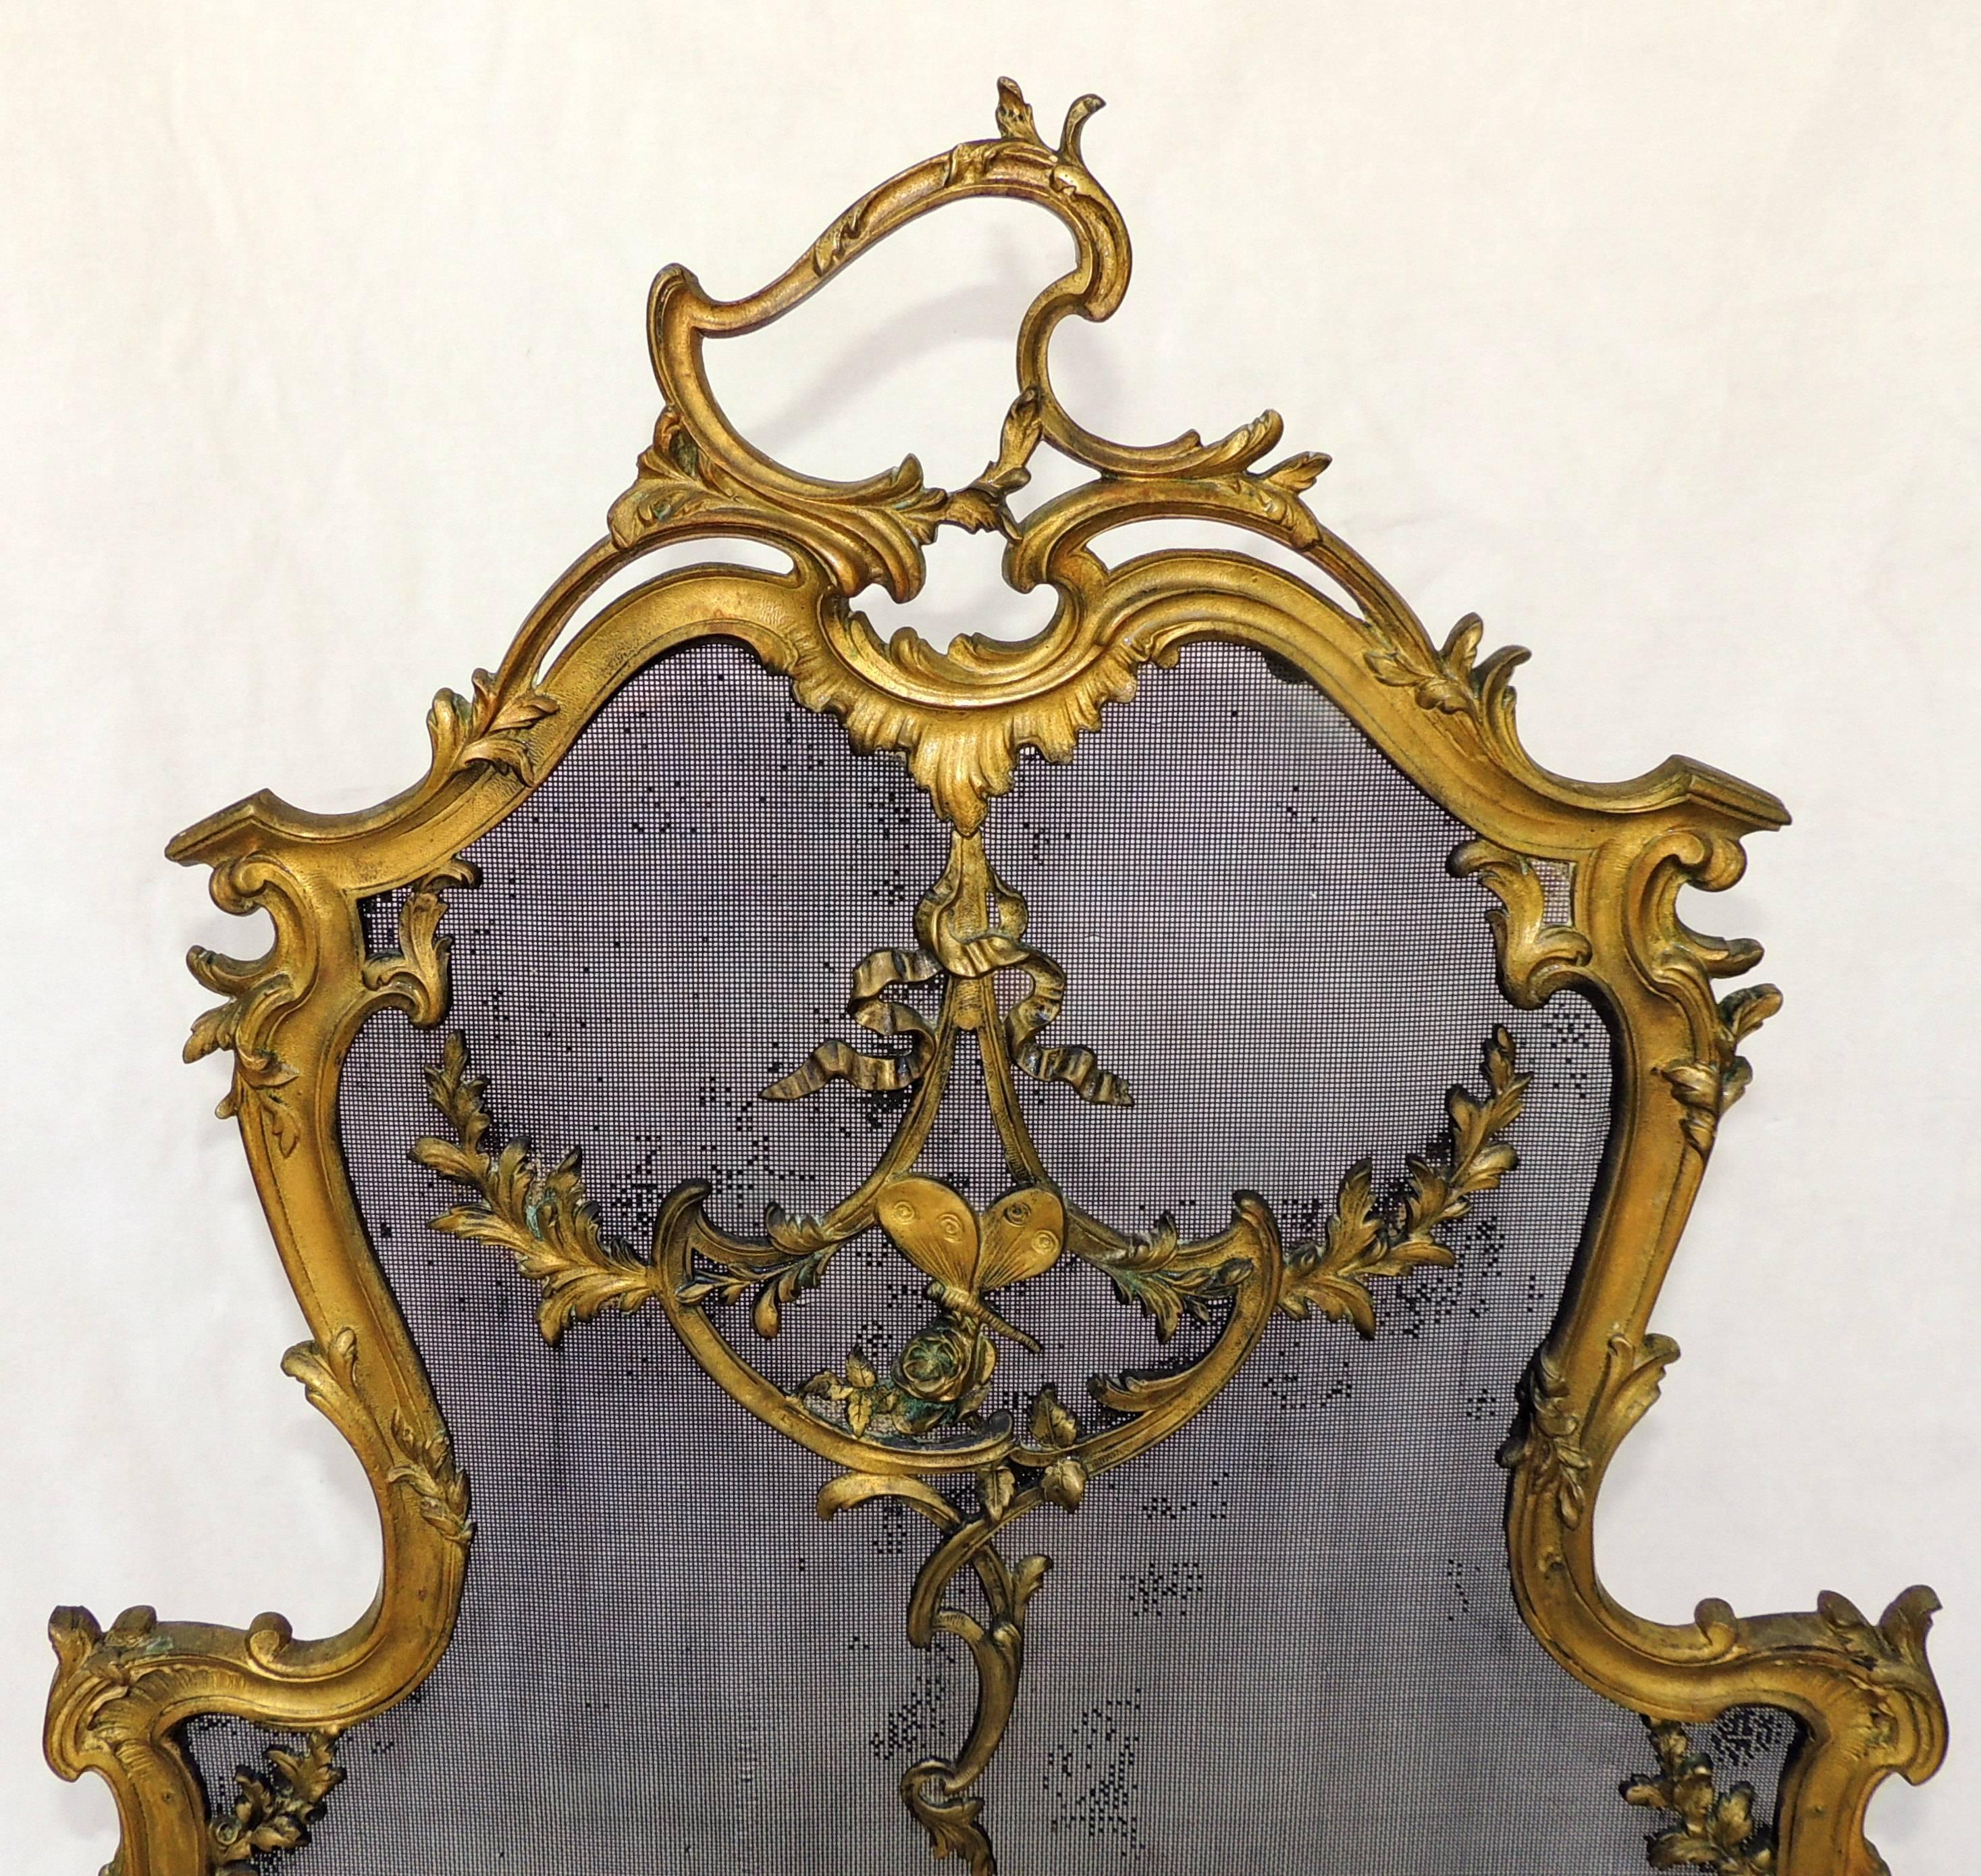 A wonderful French bronze fireplace screen ormolu-mounted with butterfly centre and garland swags with a small round plaque on the back 